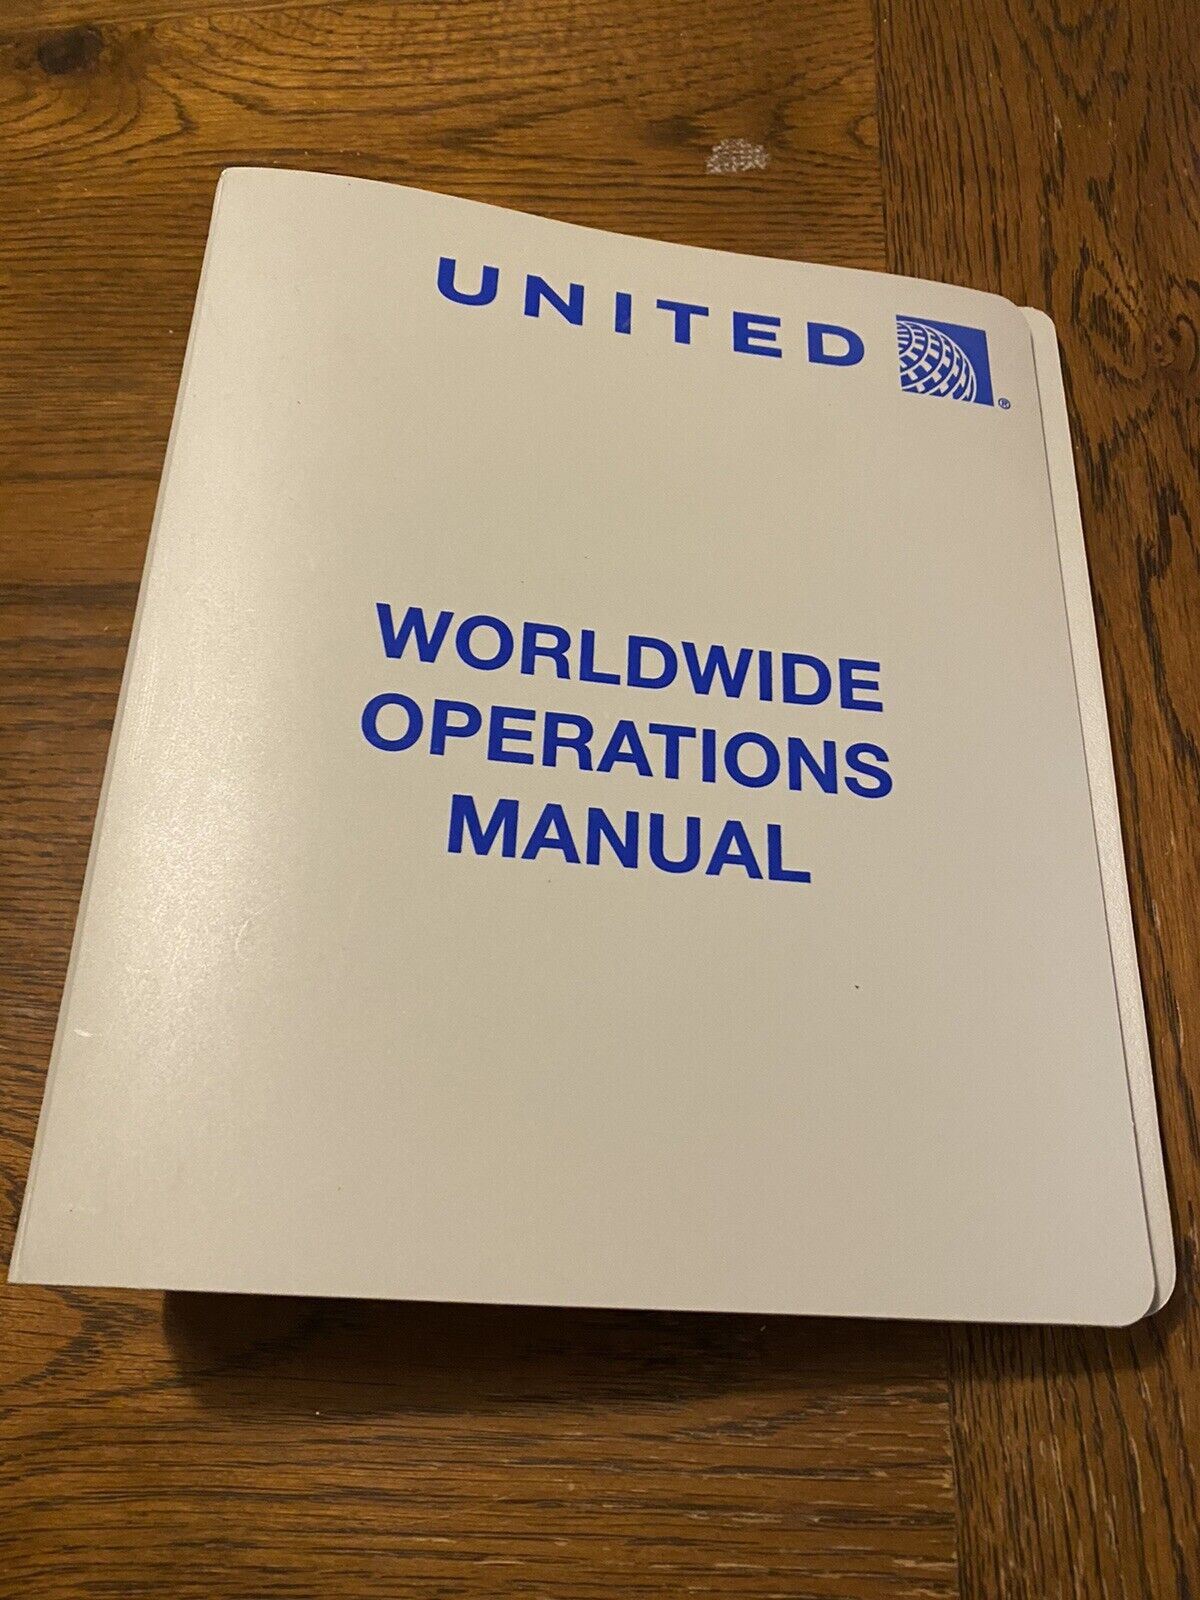 United Airlines Worldwide Flight Operations Manual Binder 9” x 8” Empty 7 Ring